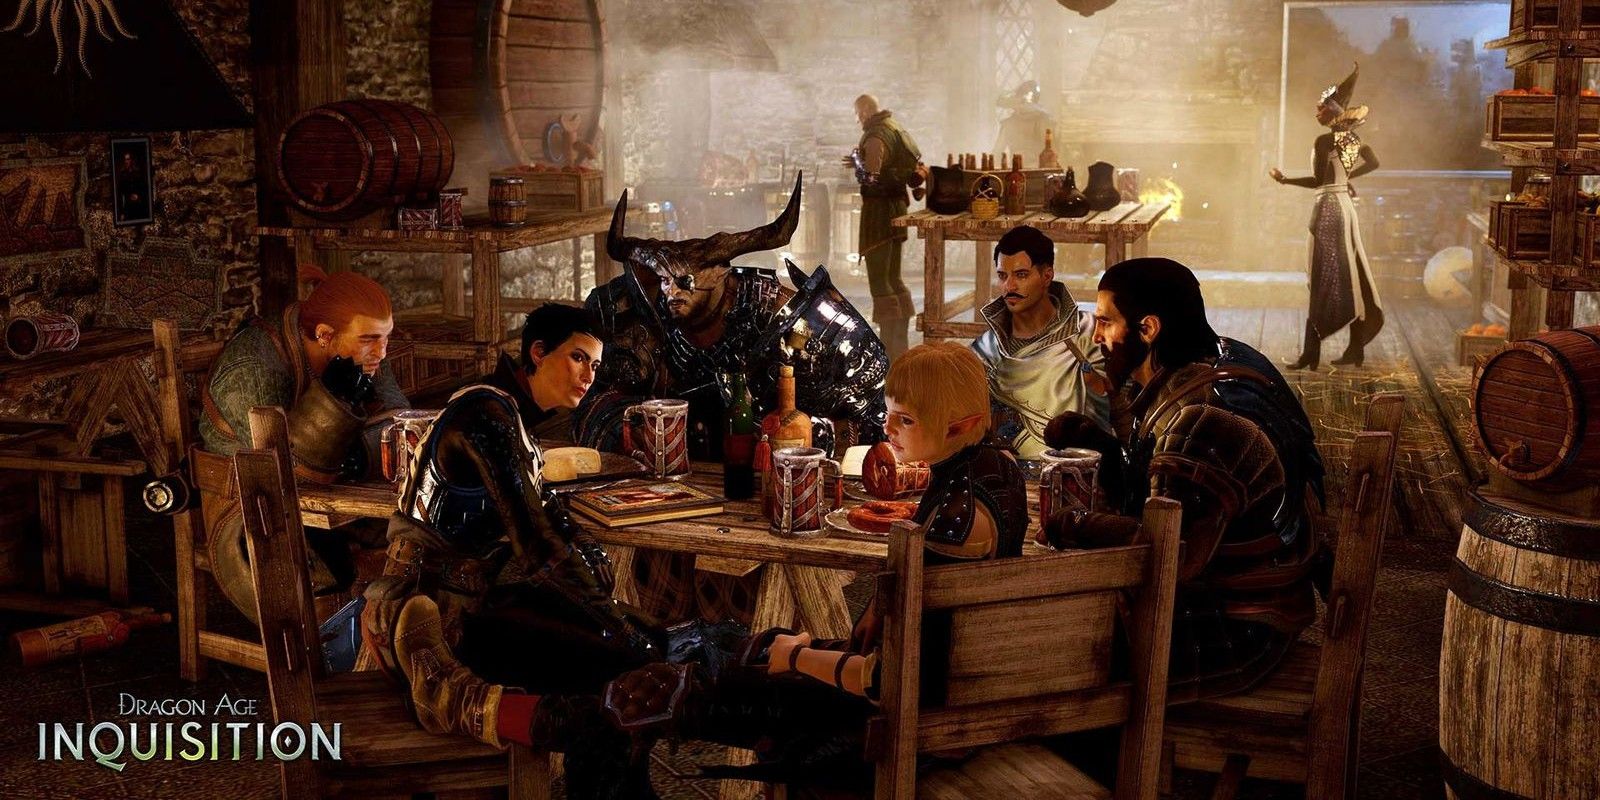 Some companions sit at the tavern and share a drink in Dragon Age: Inquisition